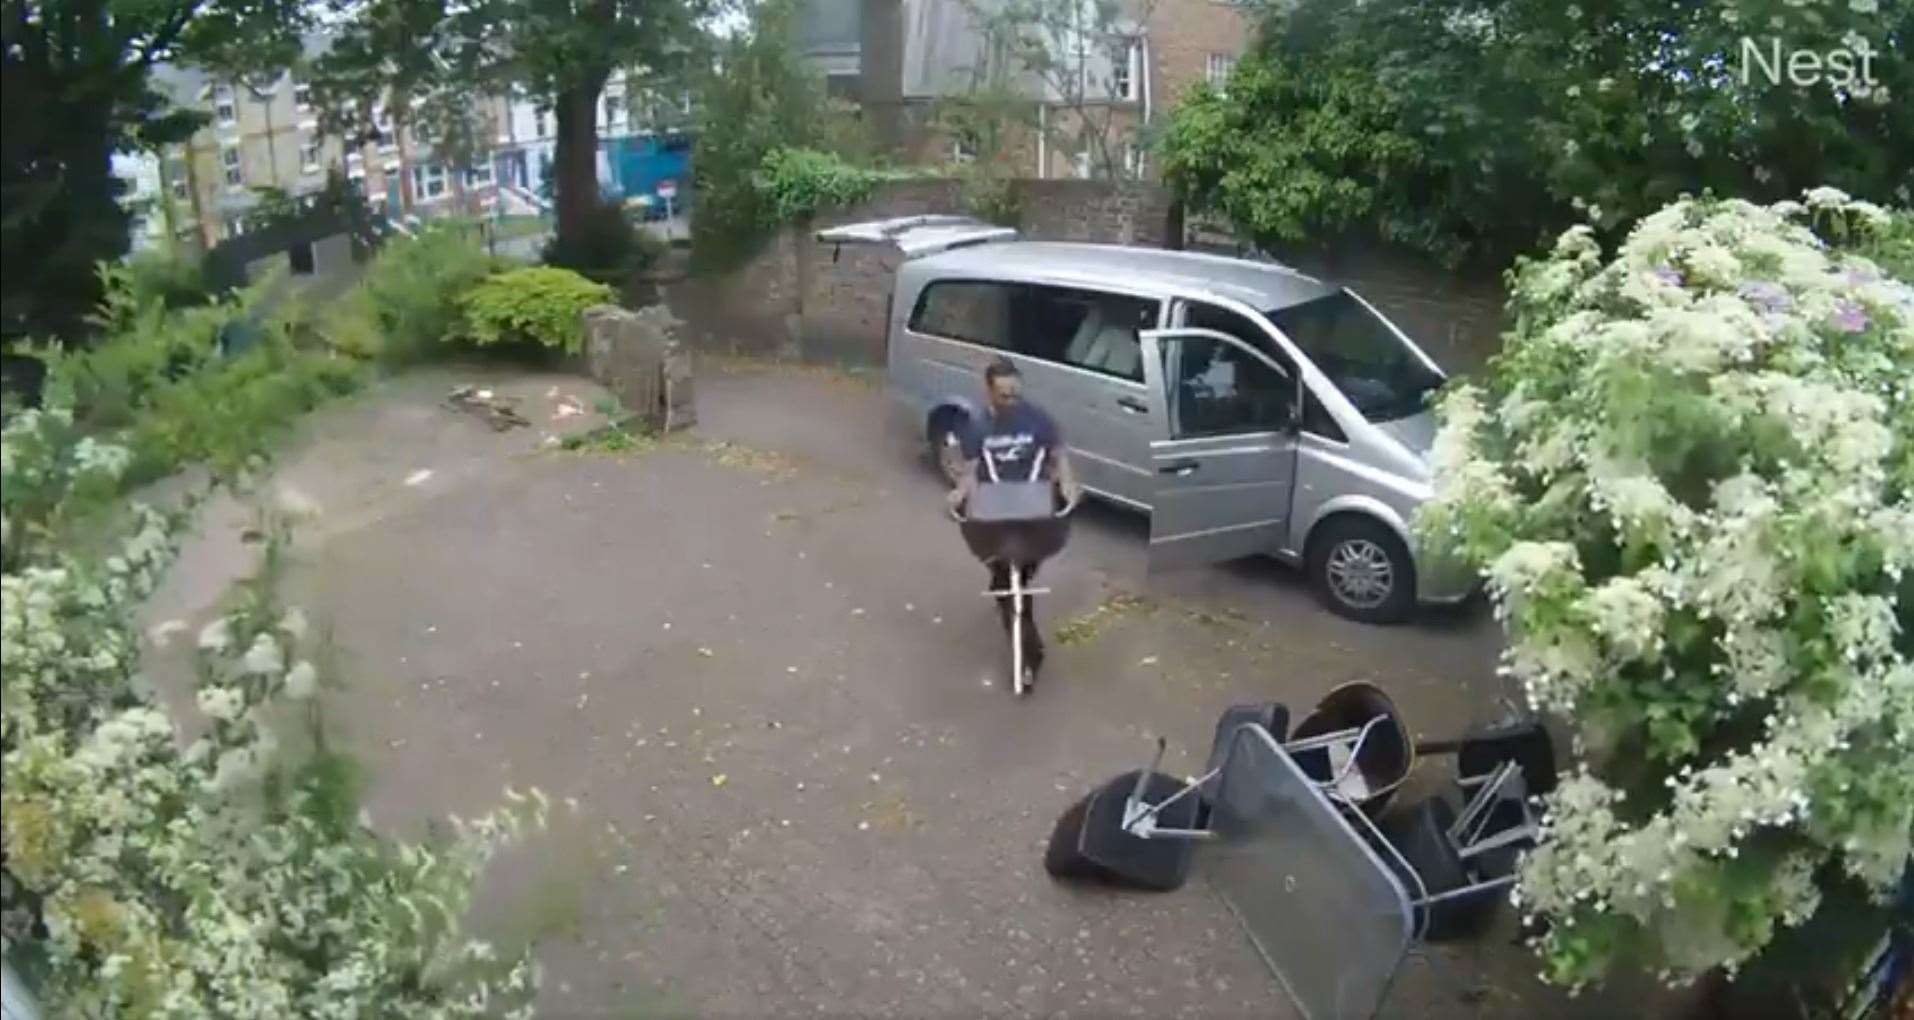 He was seen on CCTV leaving rubbish on a private driveway off London Road, Maidstone